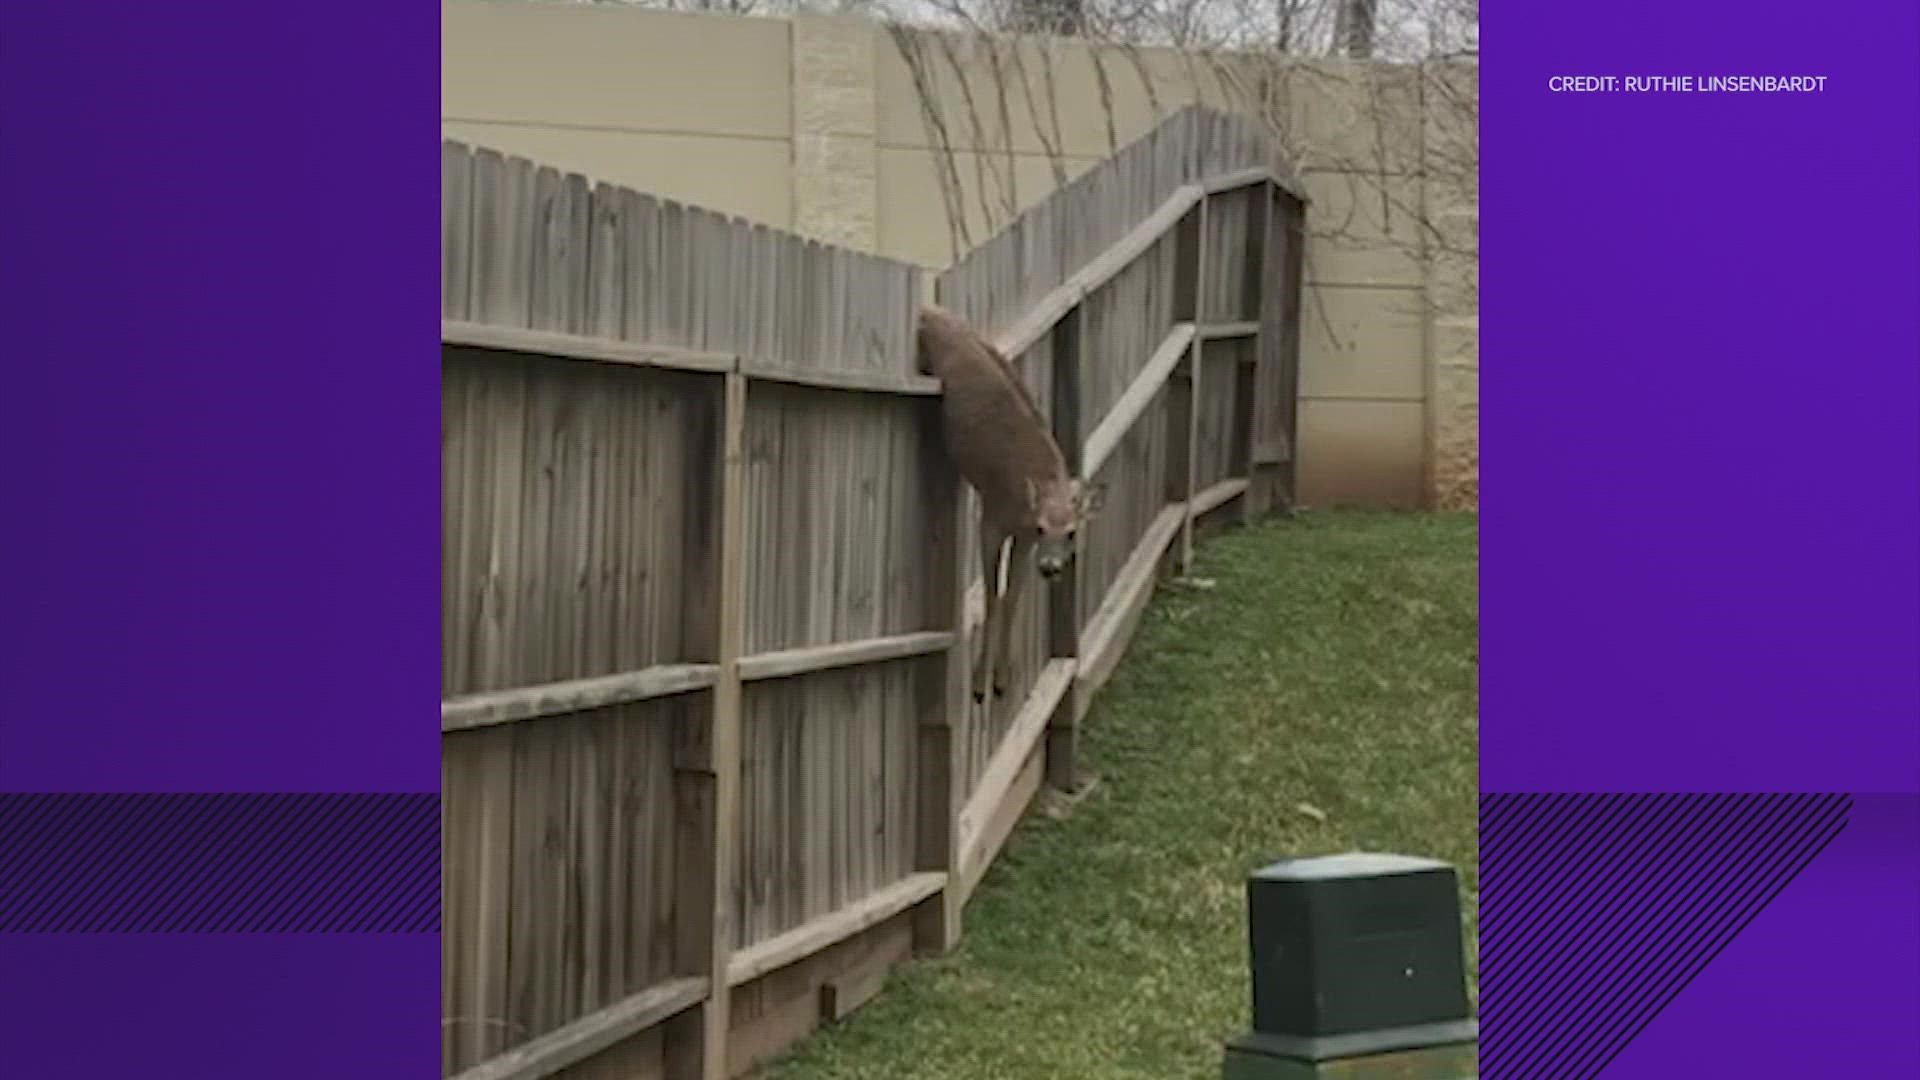 Video shows the the stuck deer and then the rescue in Sienna.